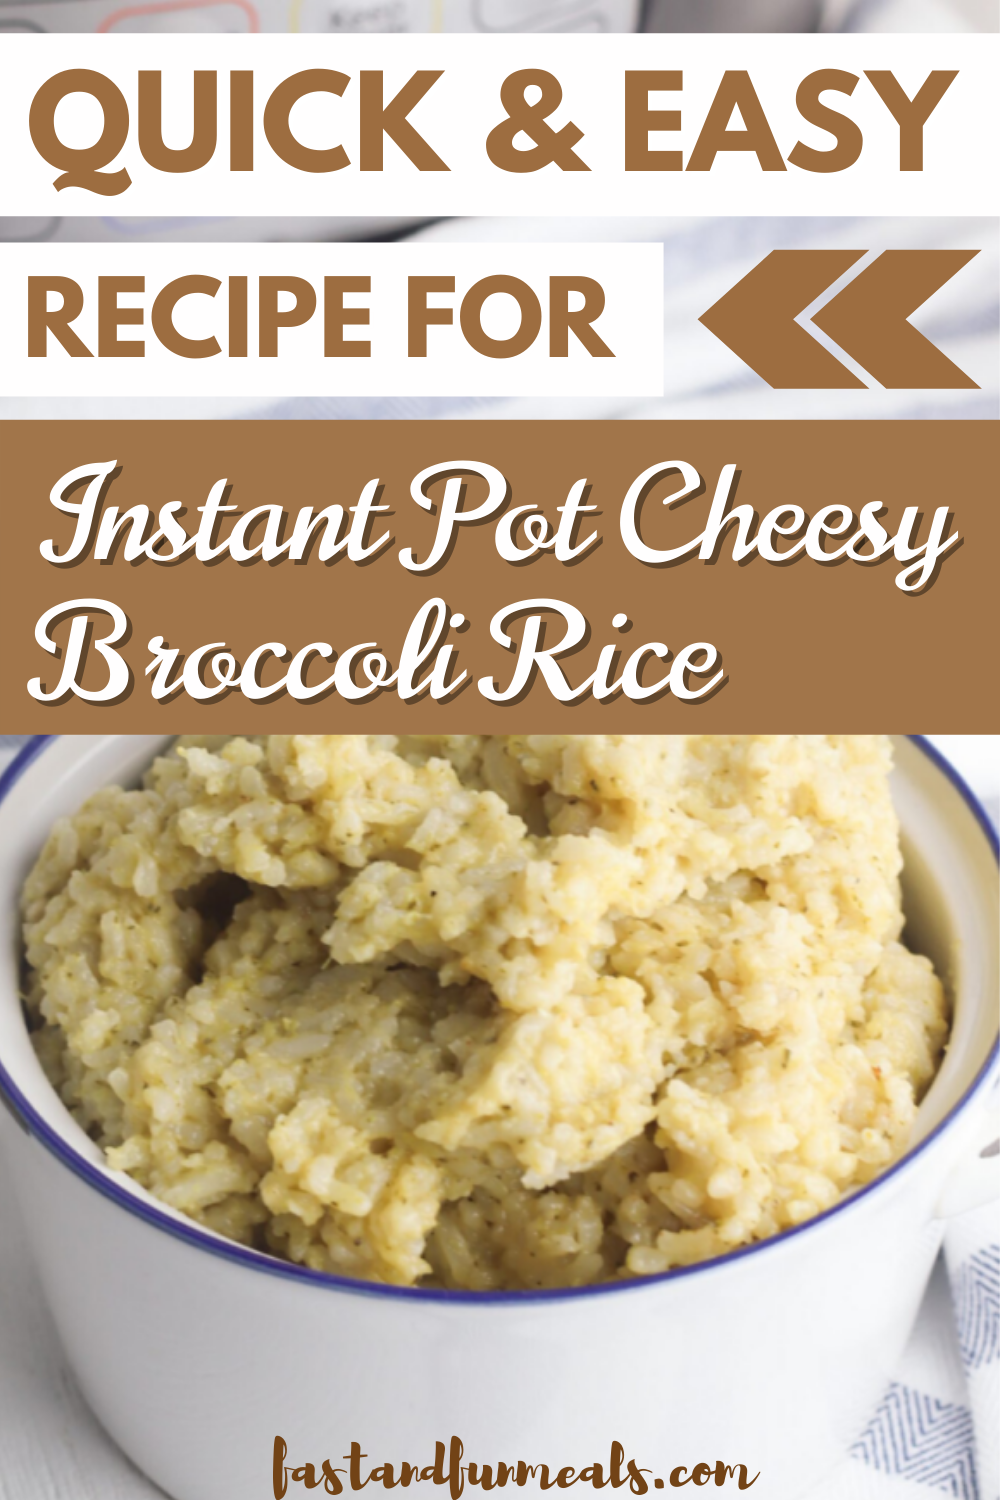 Pin showing Quick and Easy Recipe for Instant Pot Cheesy Broccoli Rice